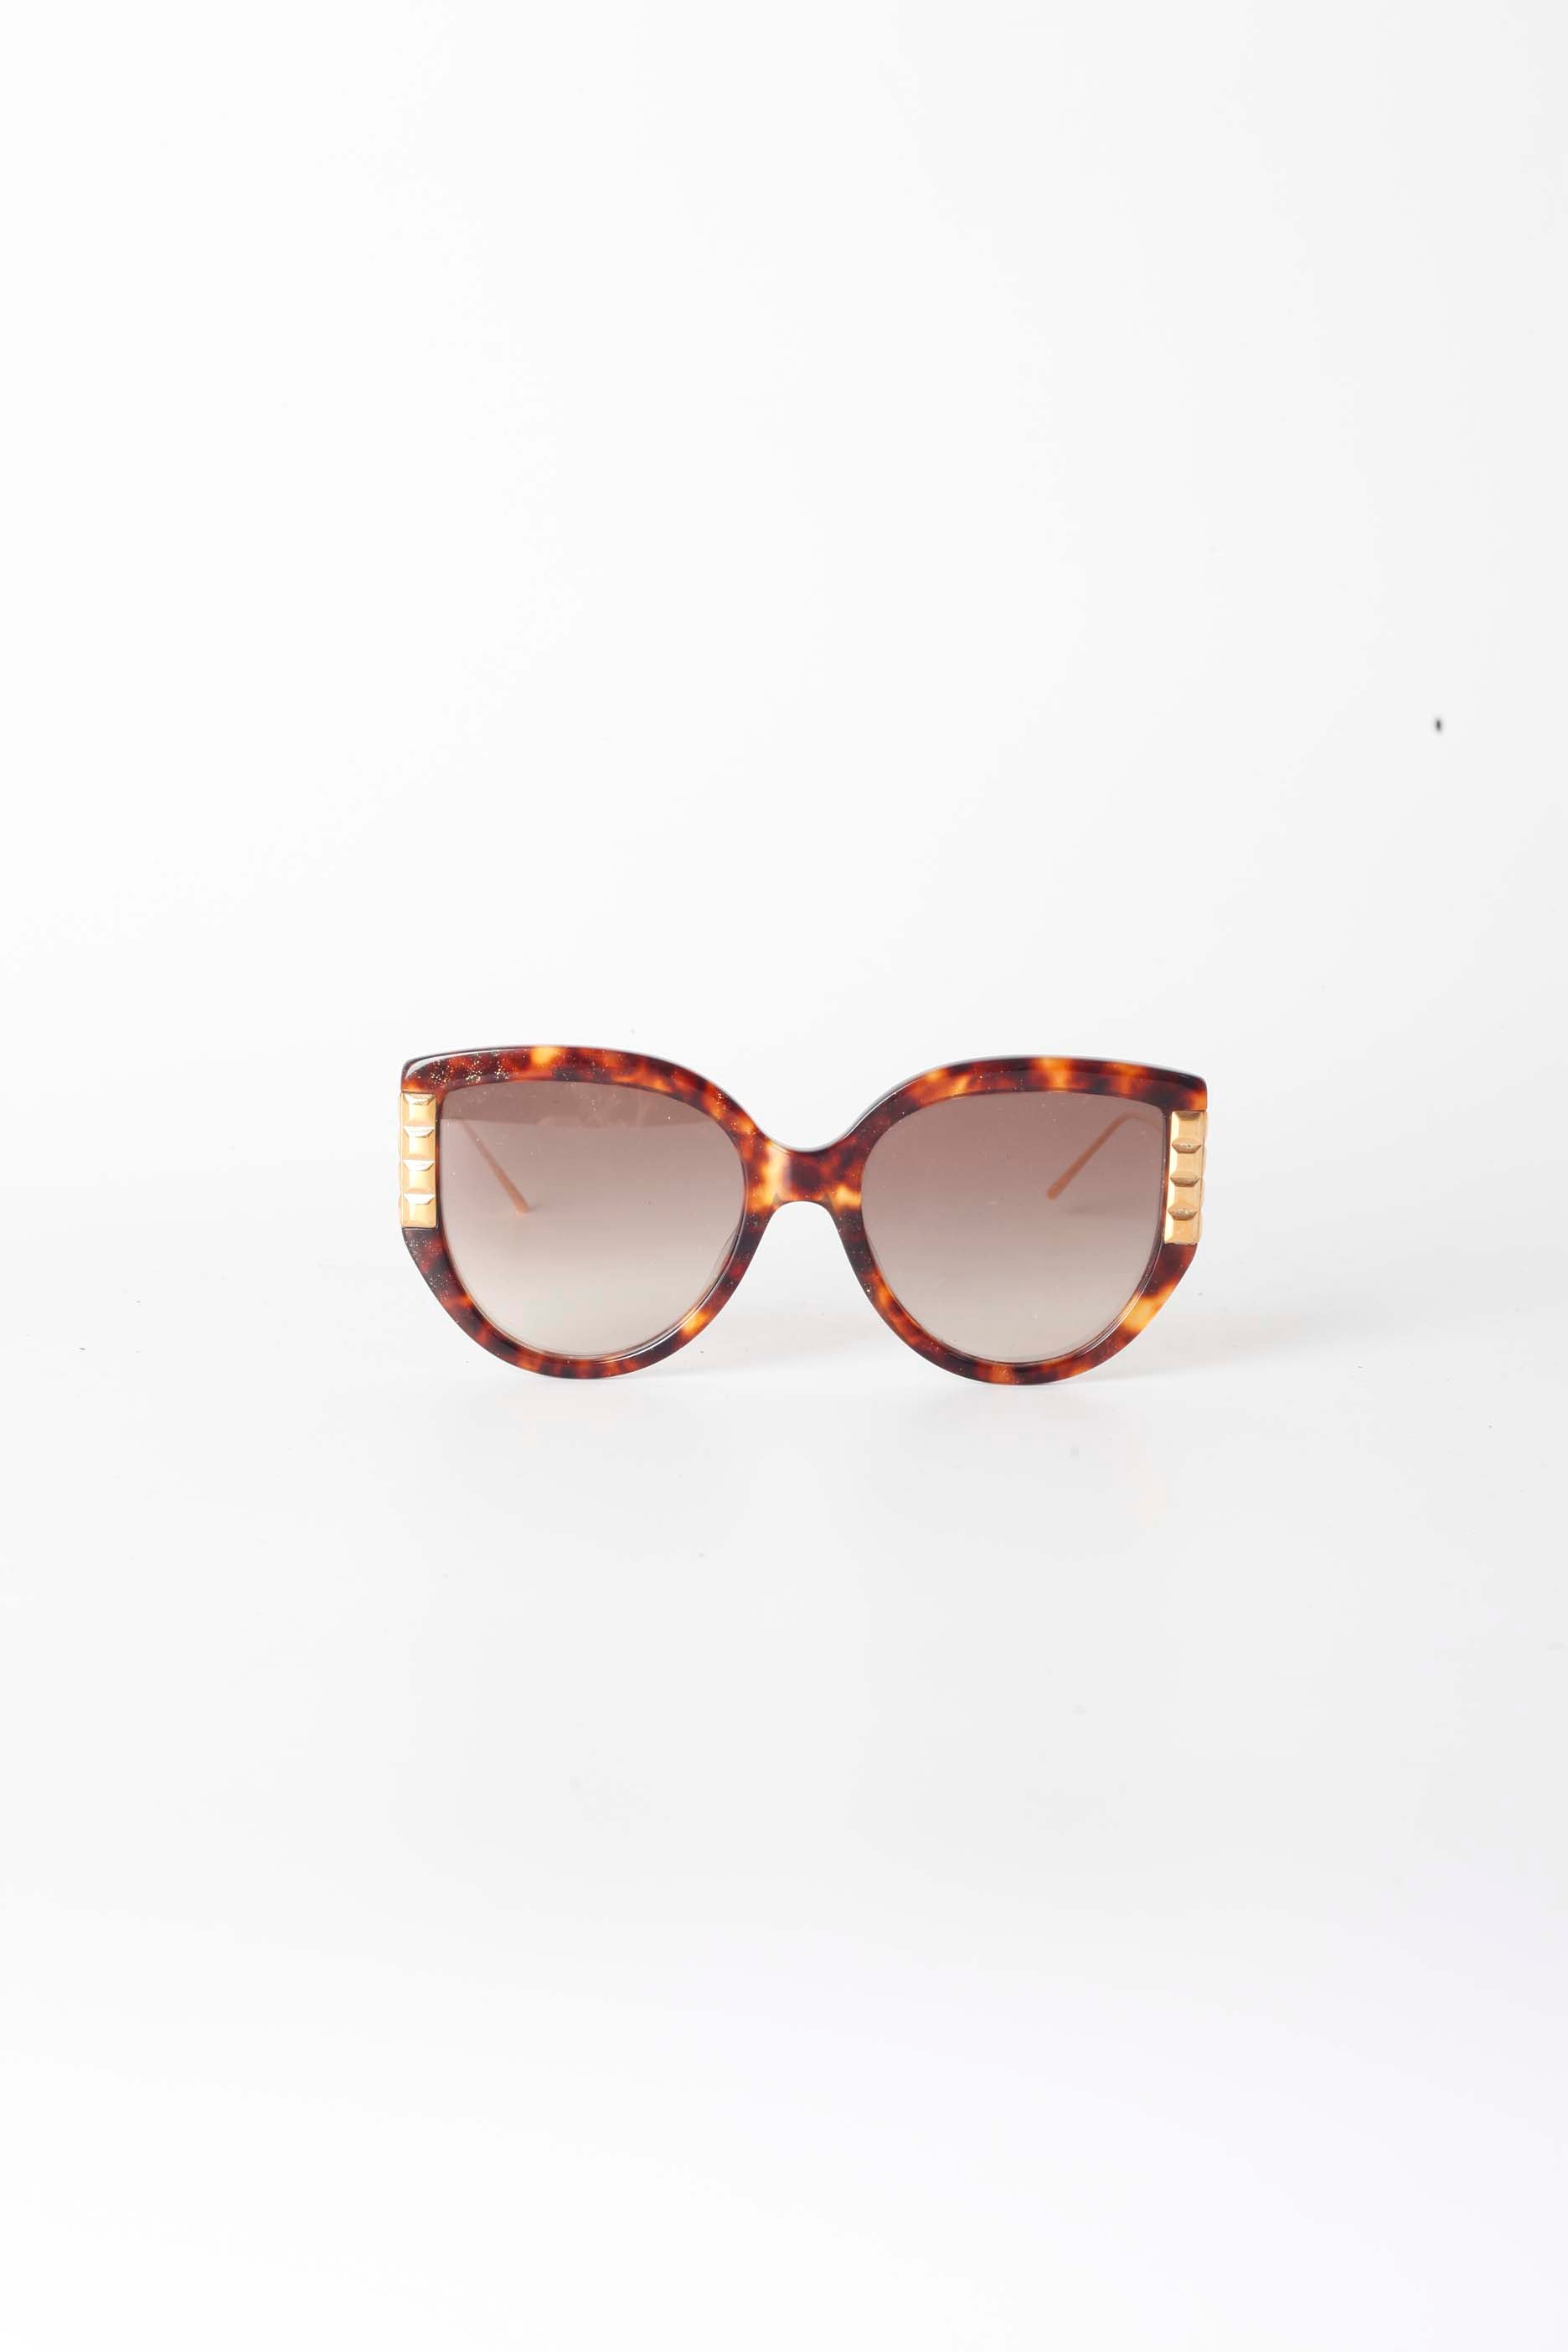 Oversized Tortoise Shell Sunglasses with Gold Studs